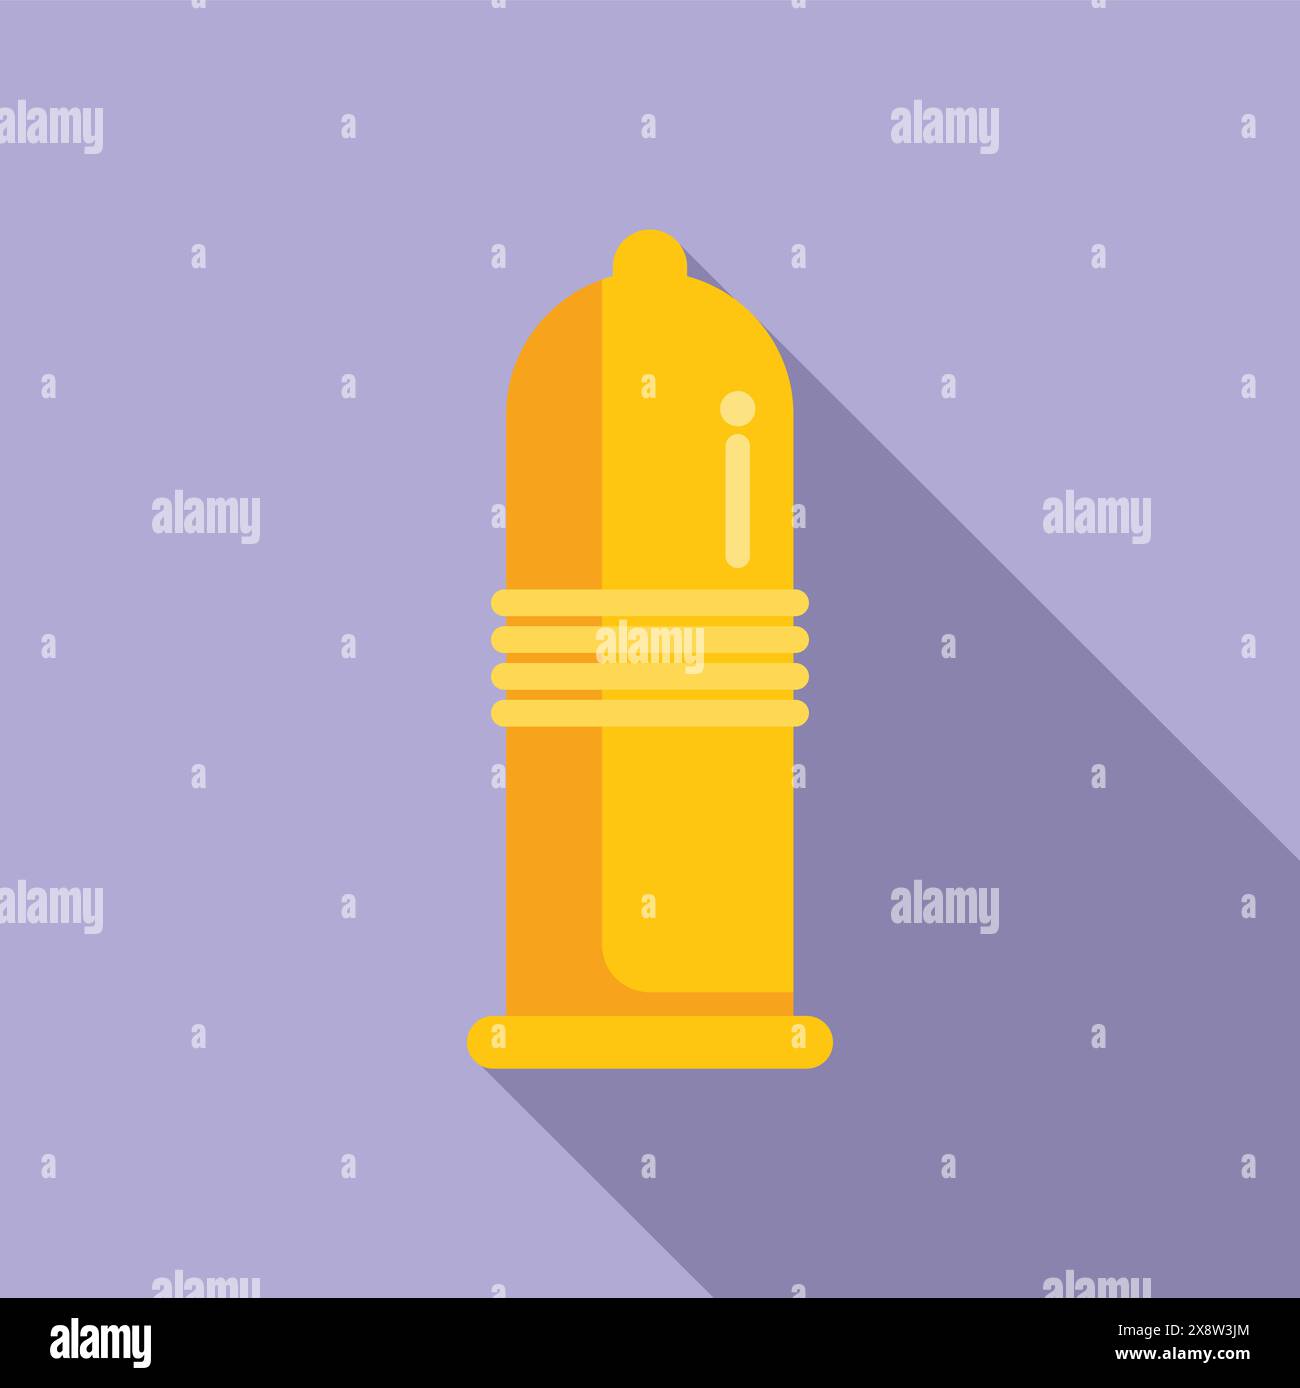 Flat design of a bright yellow fire hydrant on a purple background, suitable for safety themes Stock Vector